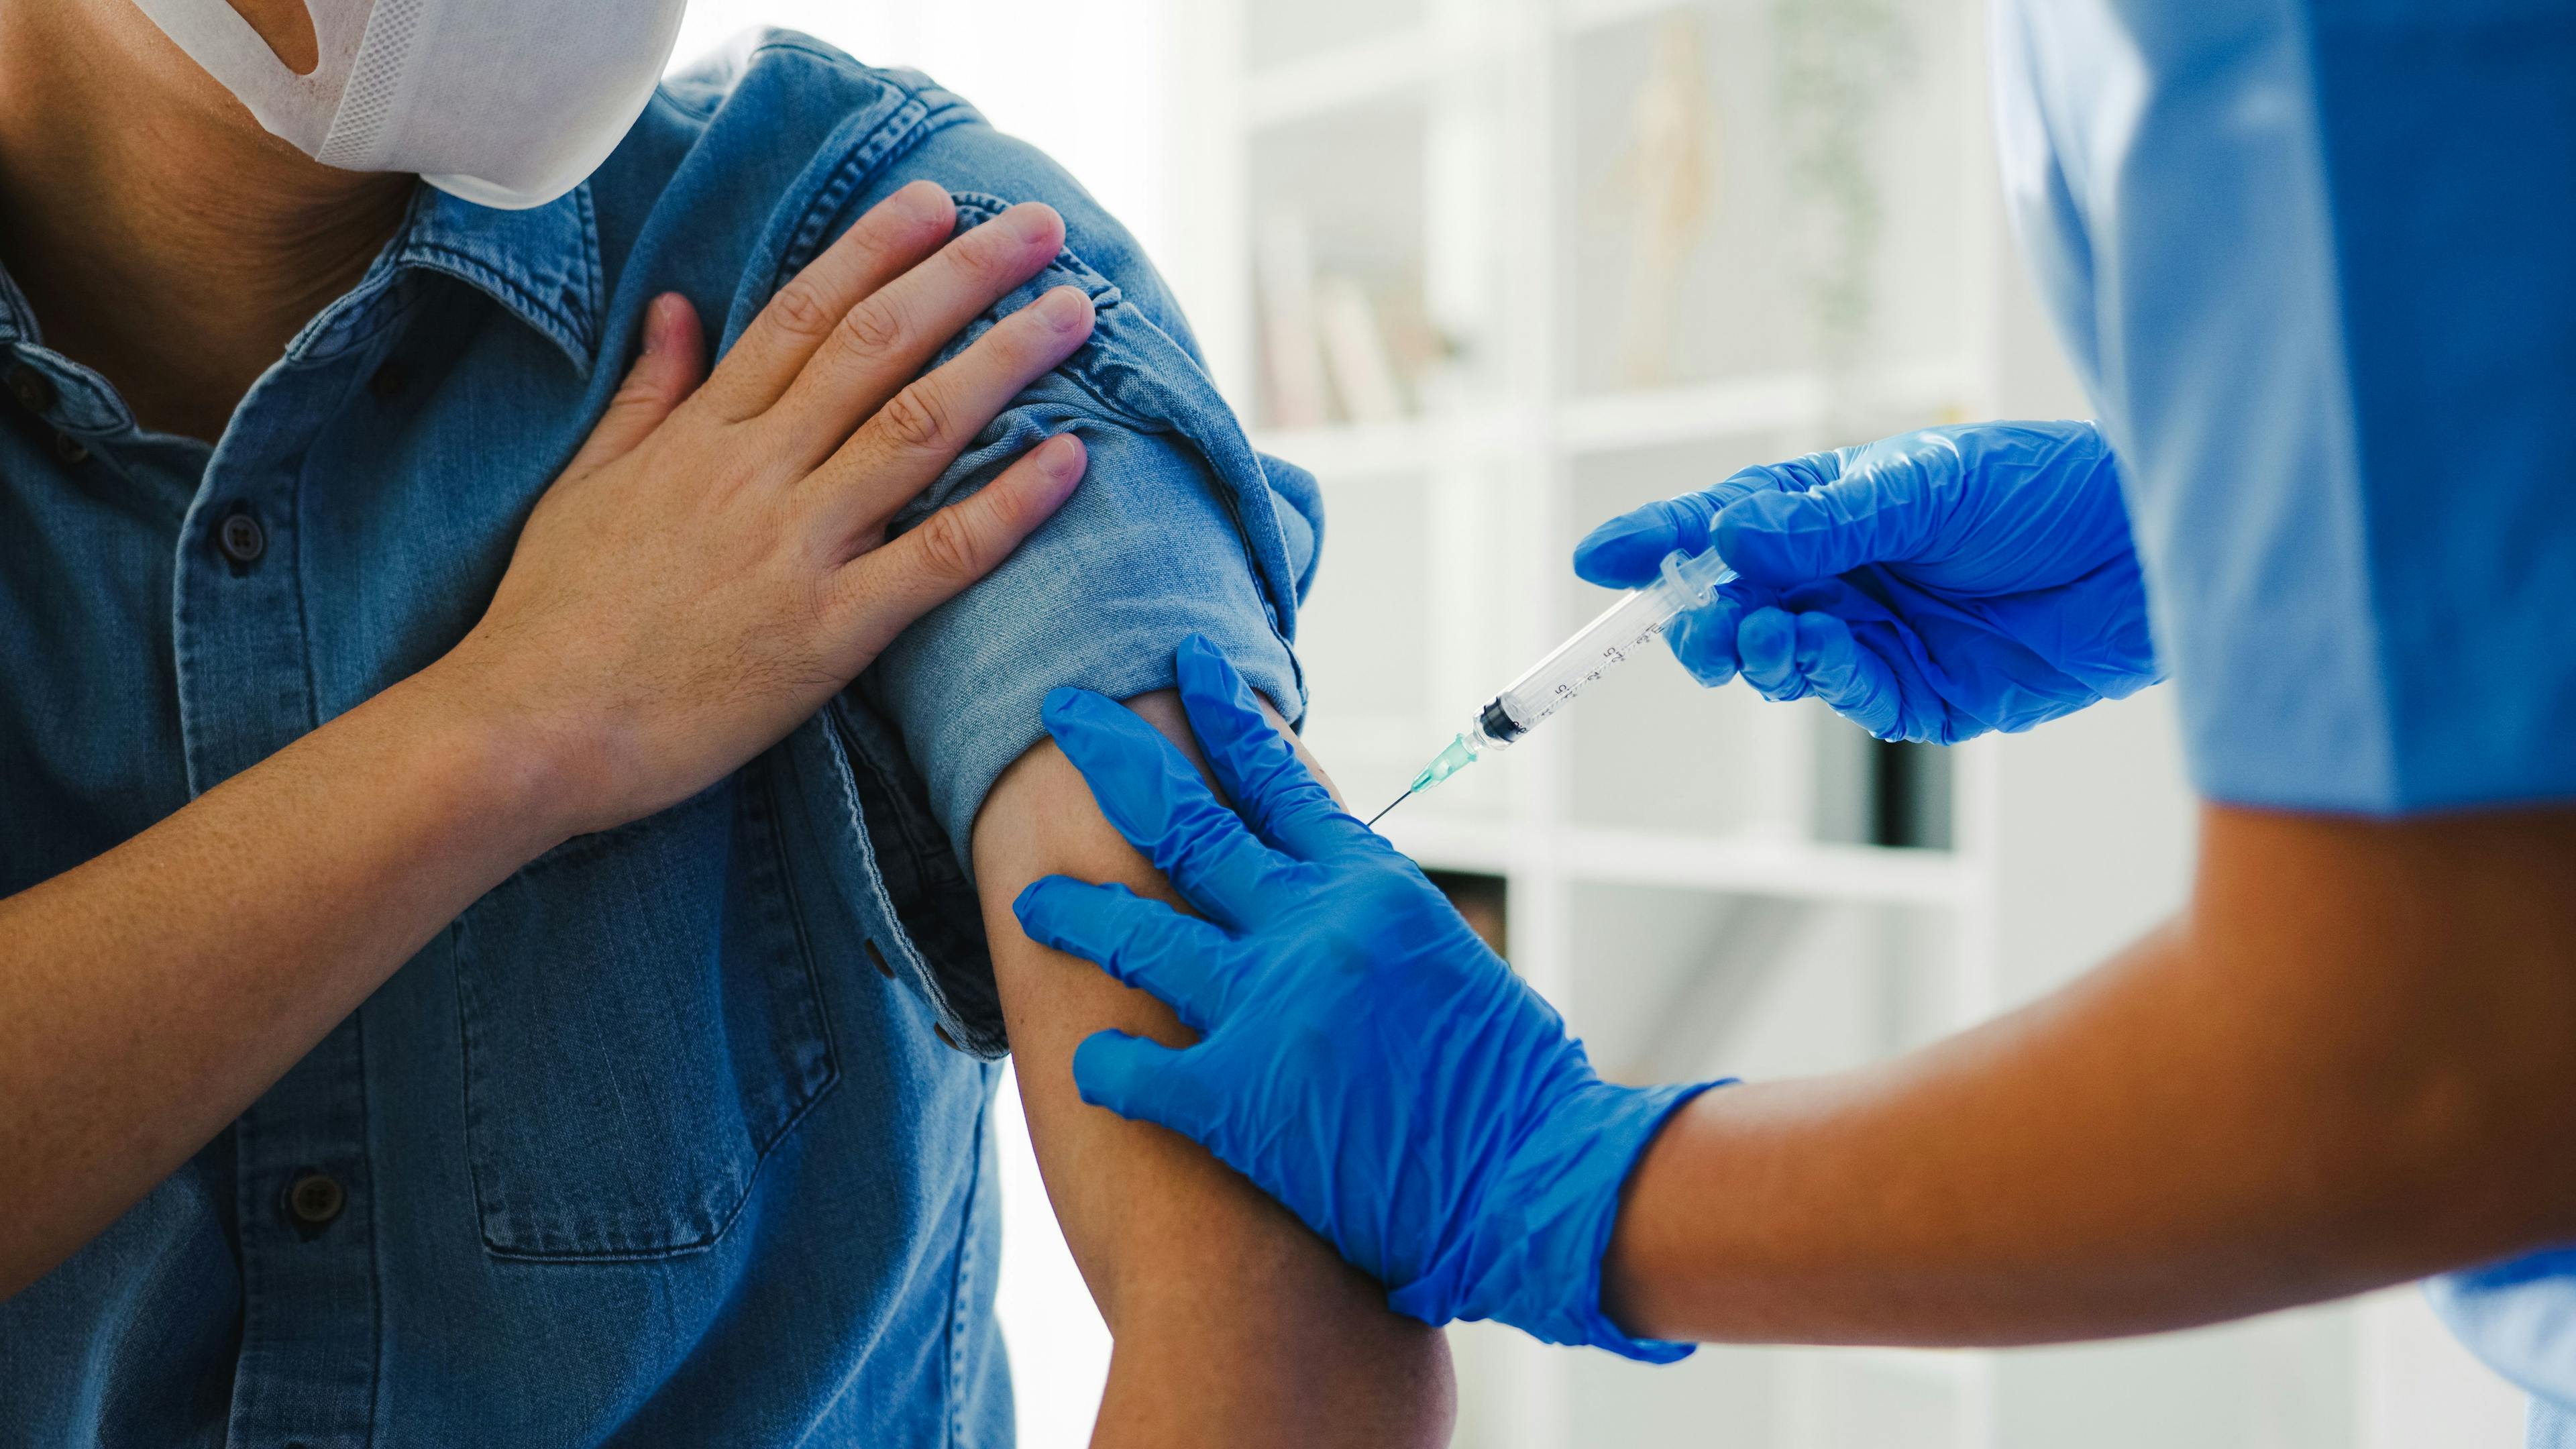 COVID-19, Flu, and RSV Vaccine Skepticism Still an Issue Among Many Americans